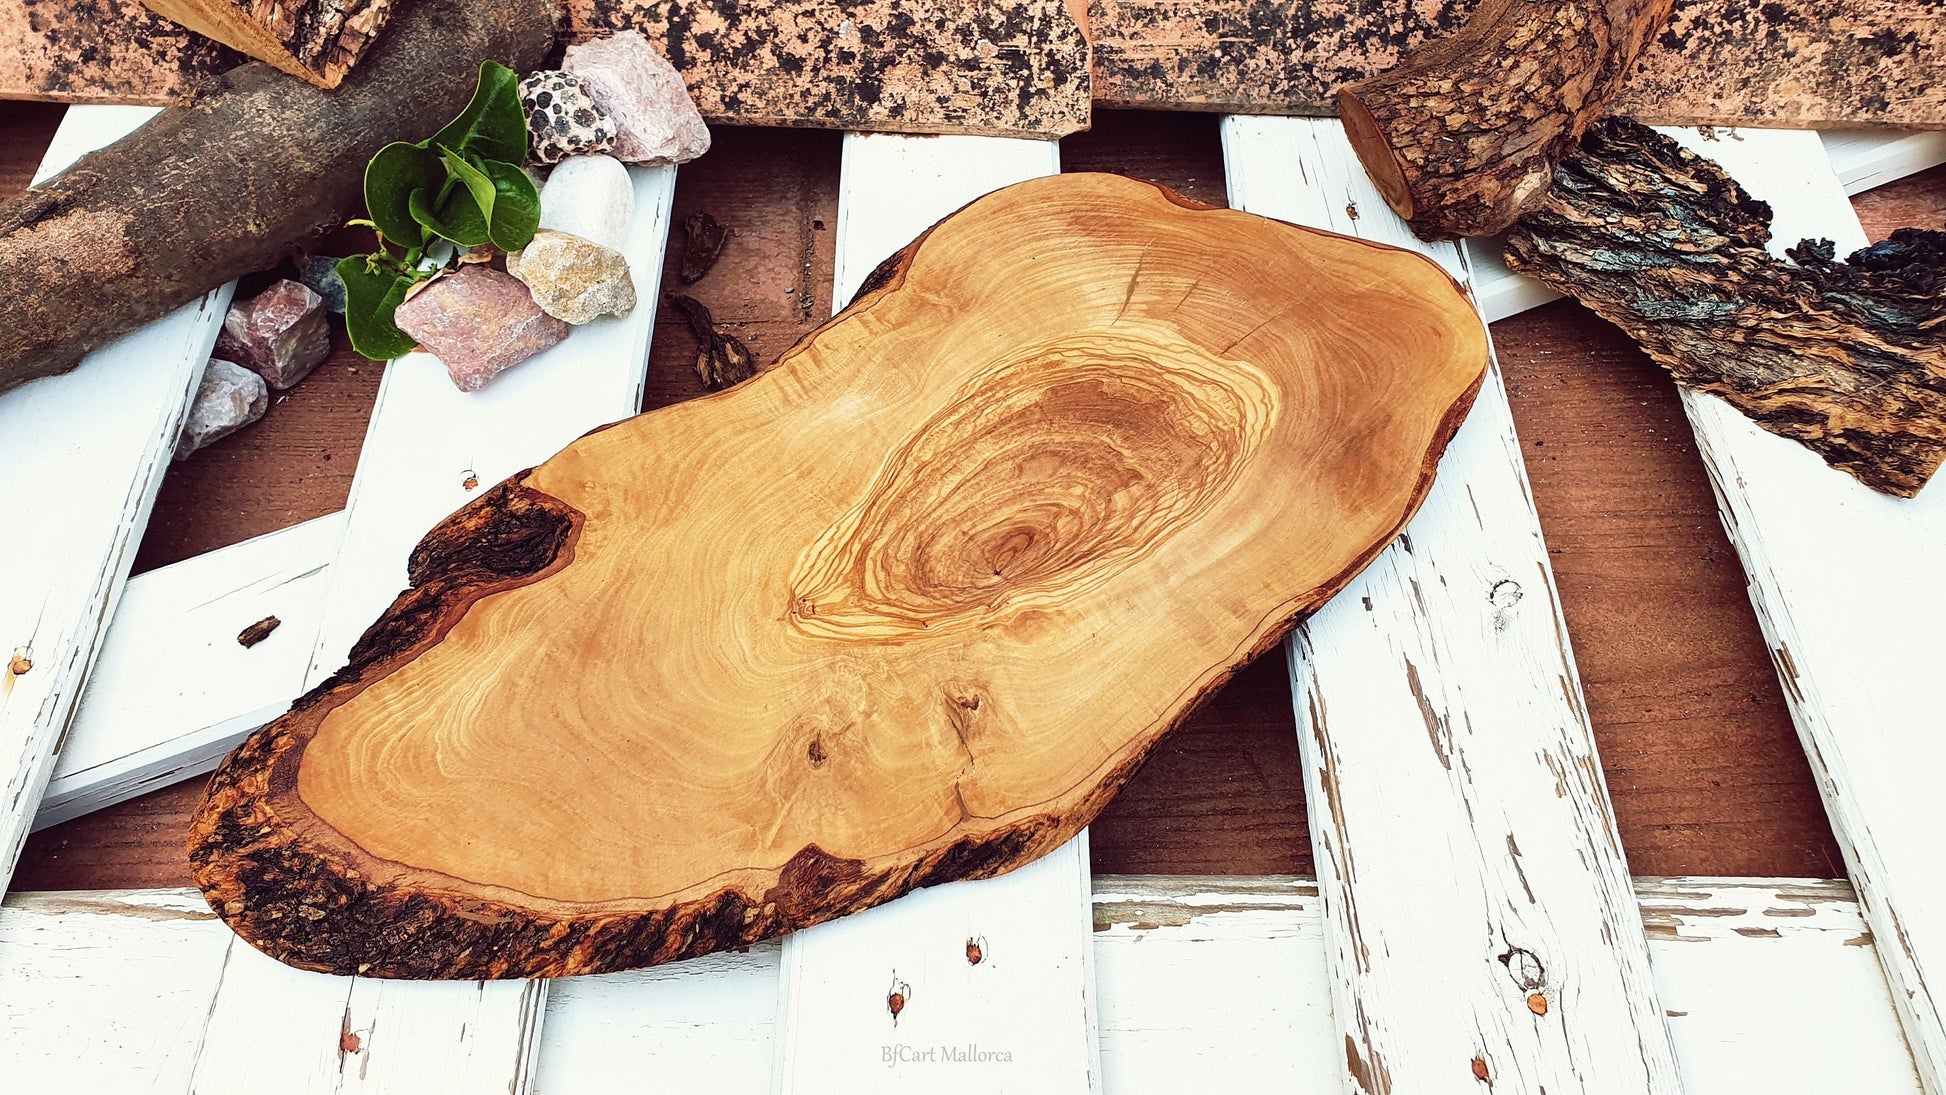 Olive Wood Charcuterie Board Natural Shape with Handle